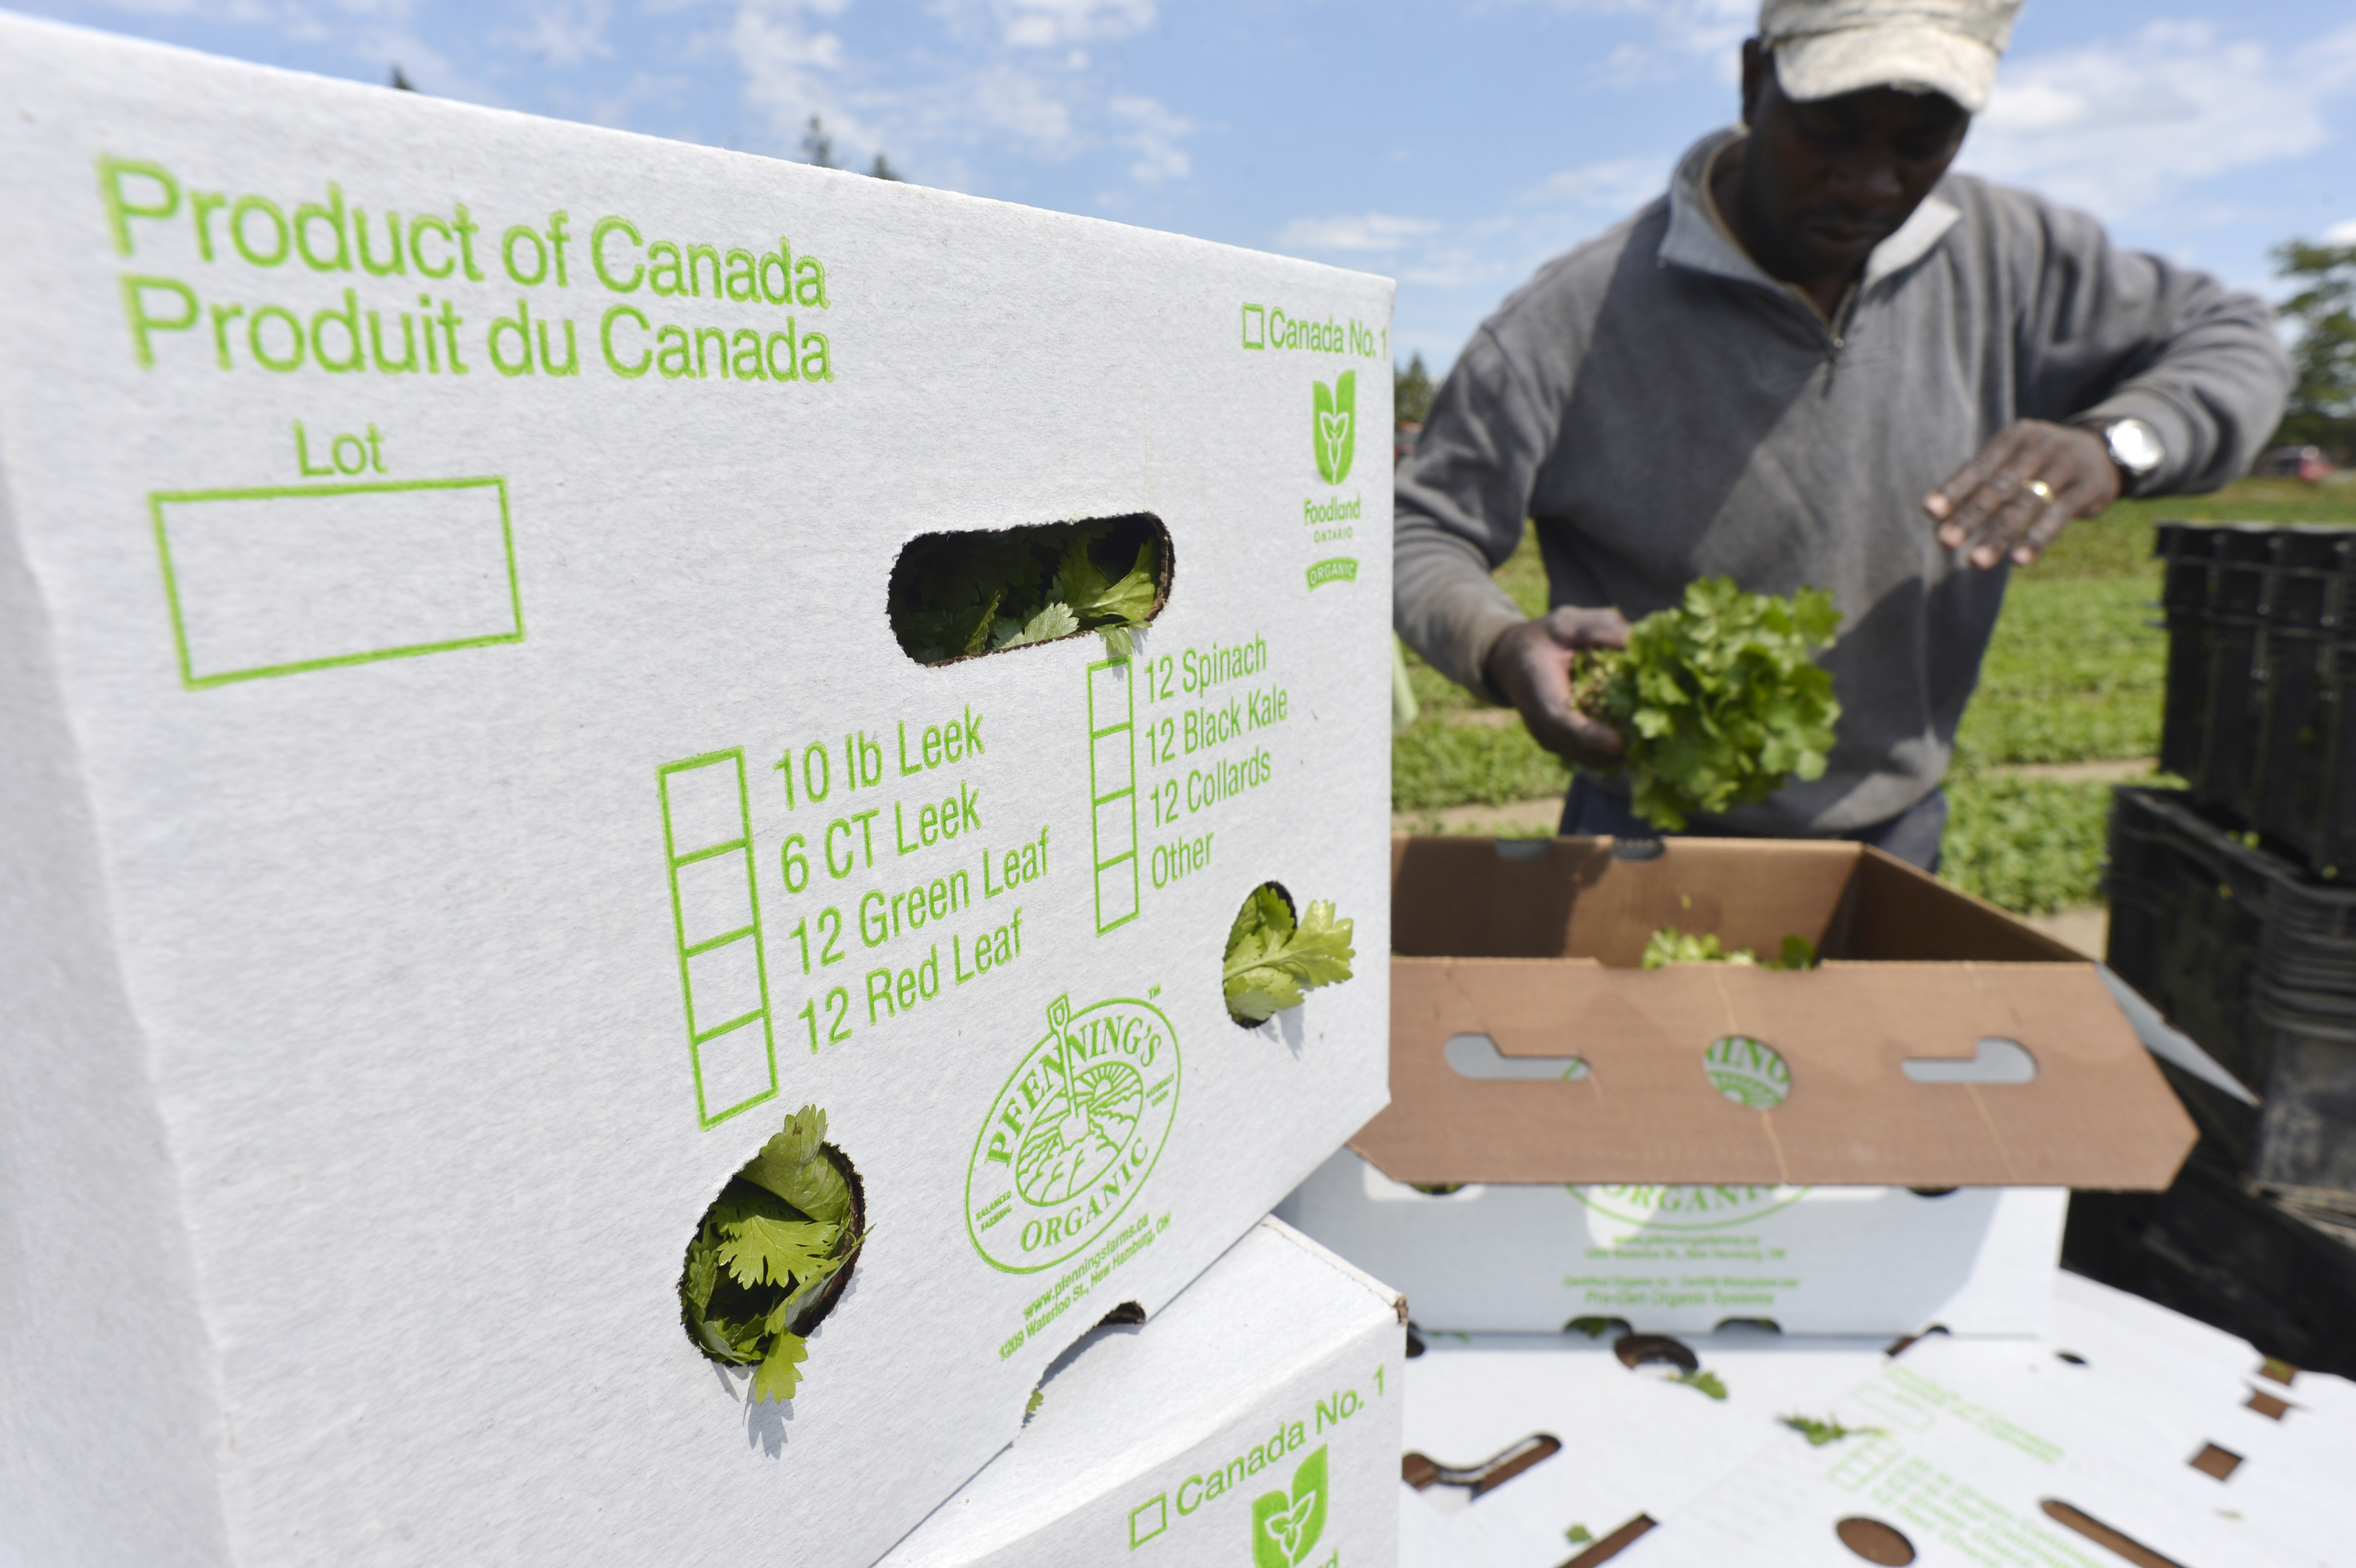 A photo of Jamaican migrant worker Desmond Daley at an Ontario farm in 2018.